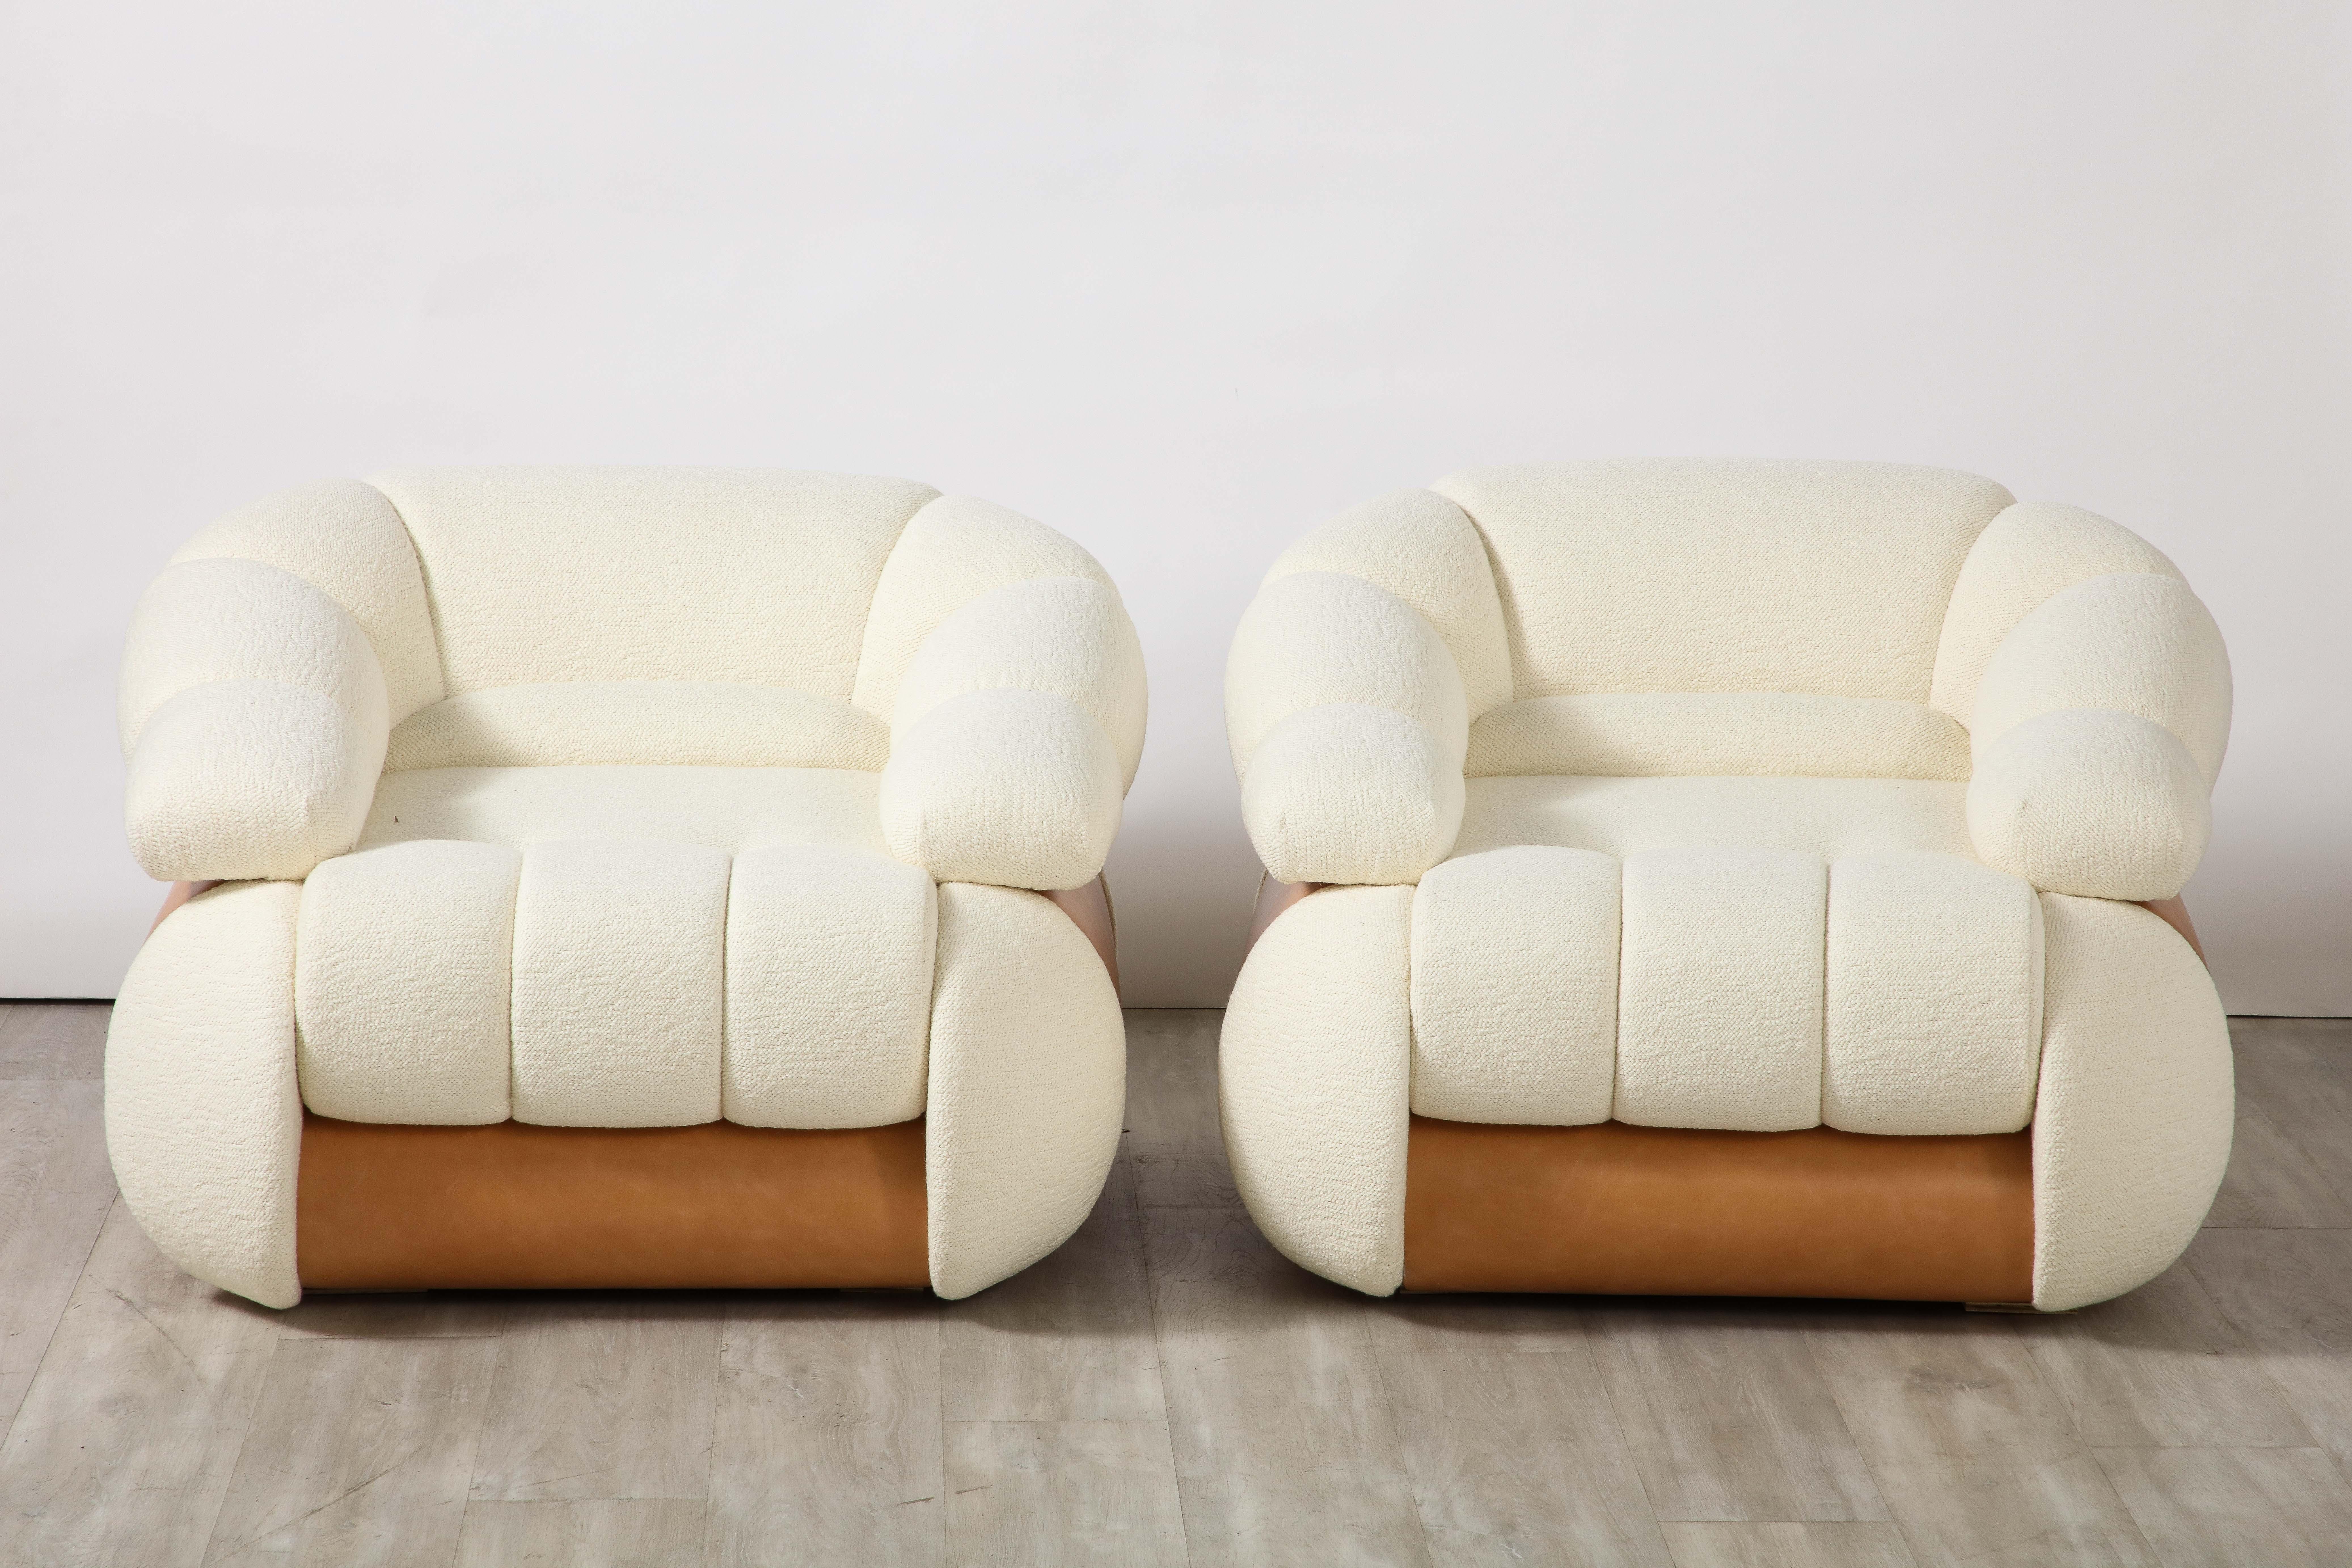 Pair of Adriano Piazzesi Italian 1970's Lounge Chairs In Good Condition For Sale In New York, NY